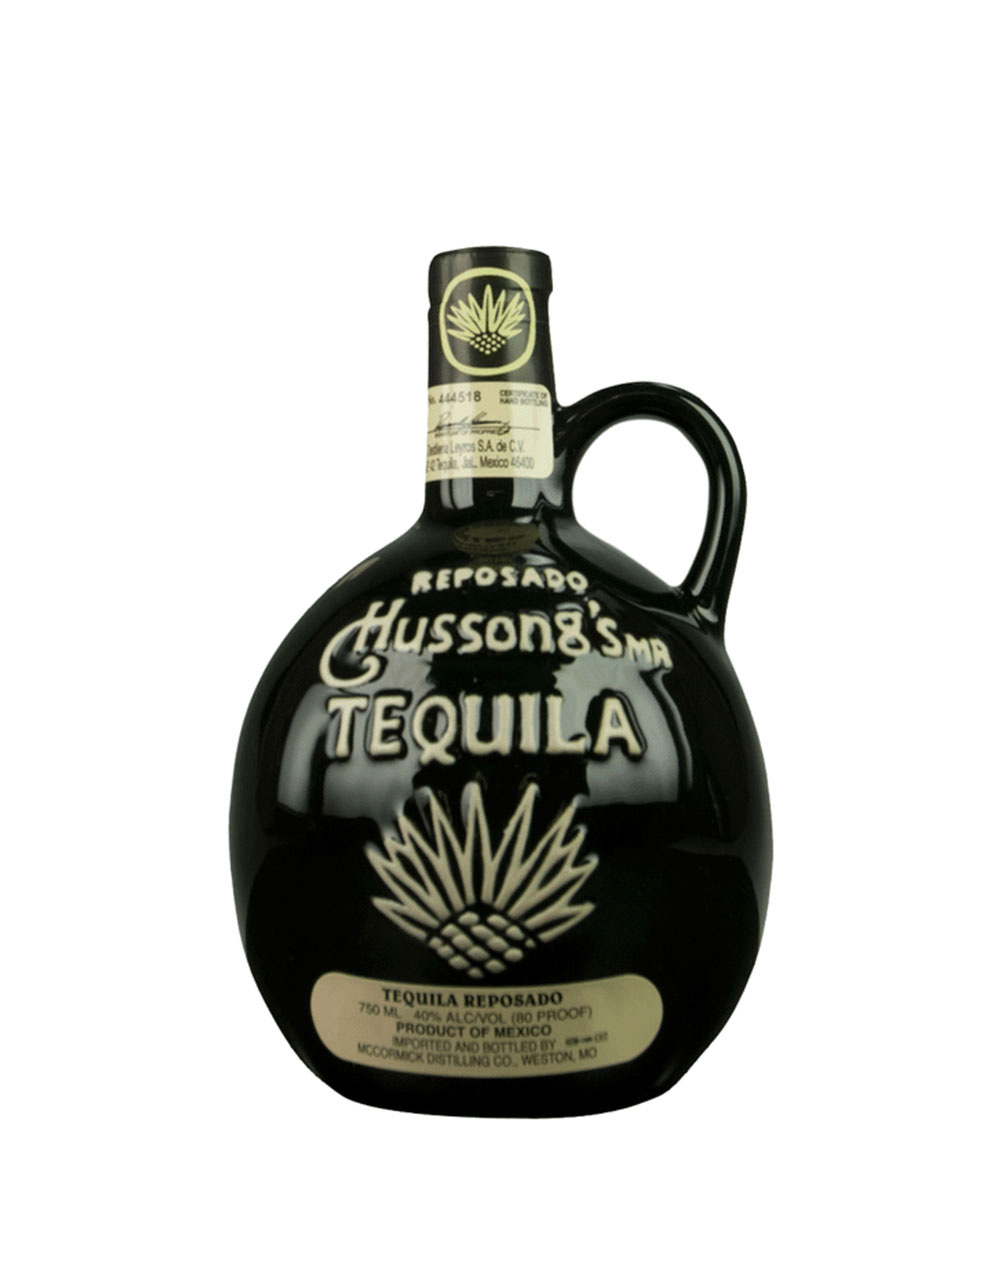 Clase Azul Gold Tequila